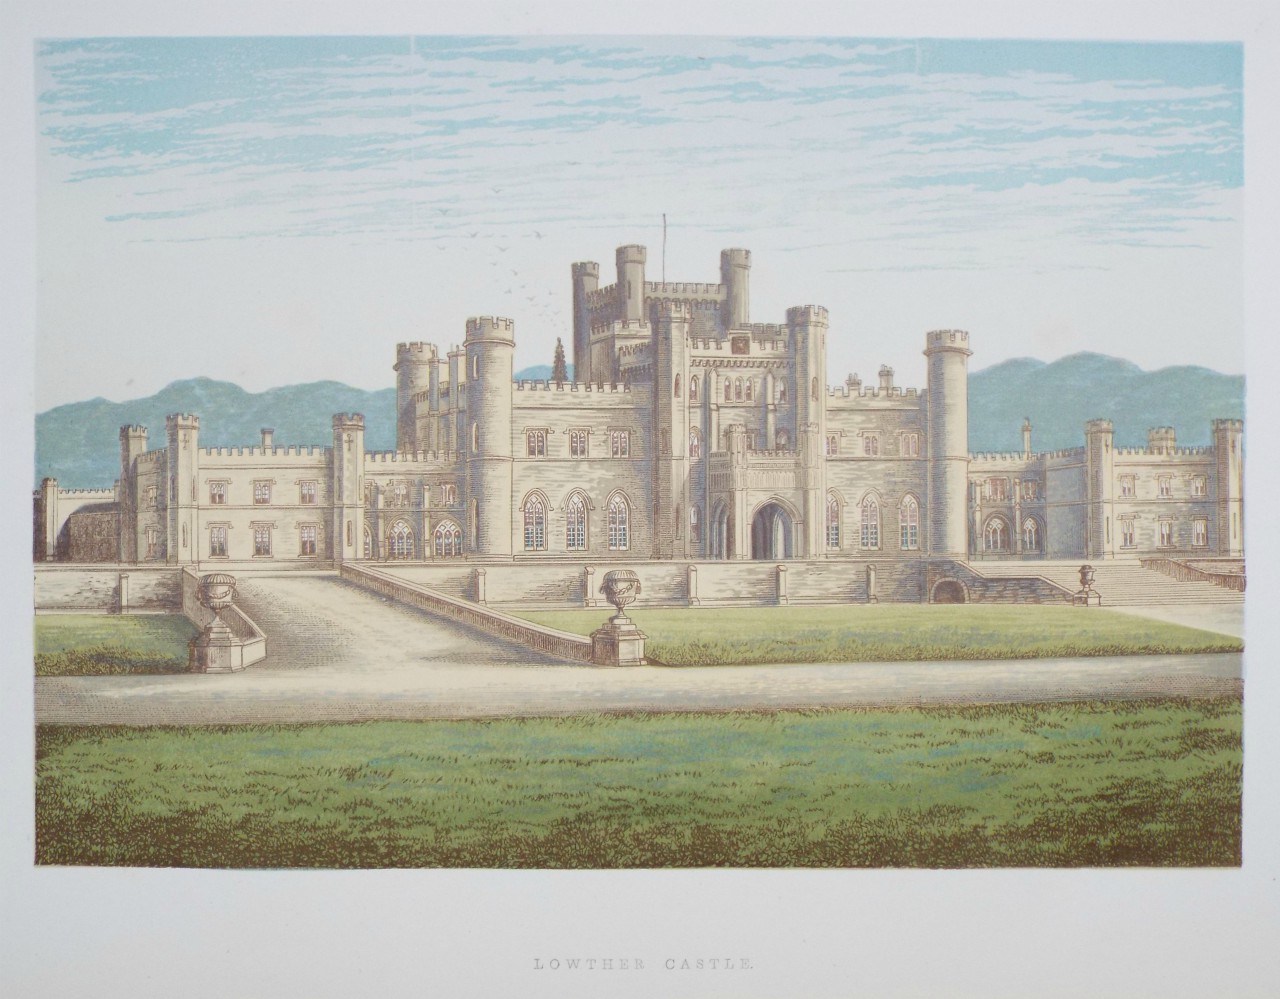 Chromo-lithograph - Lowther Castle.